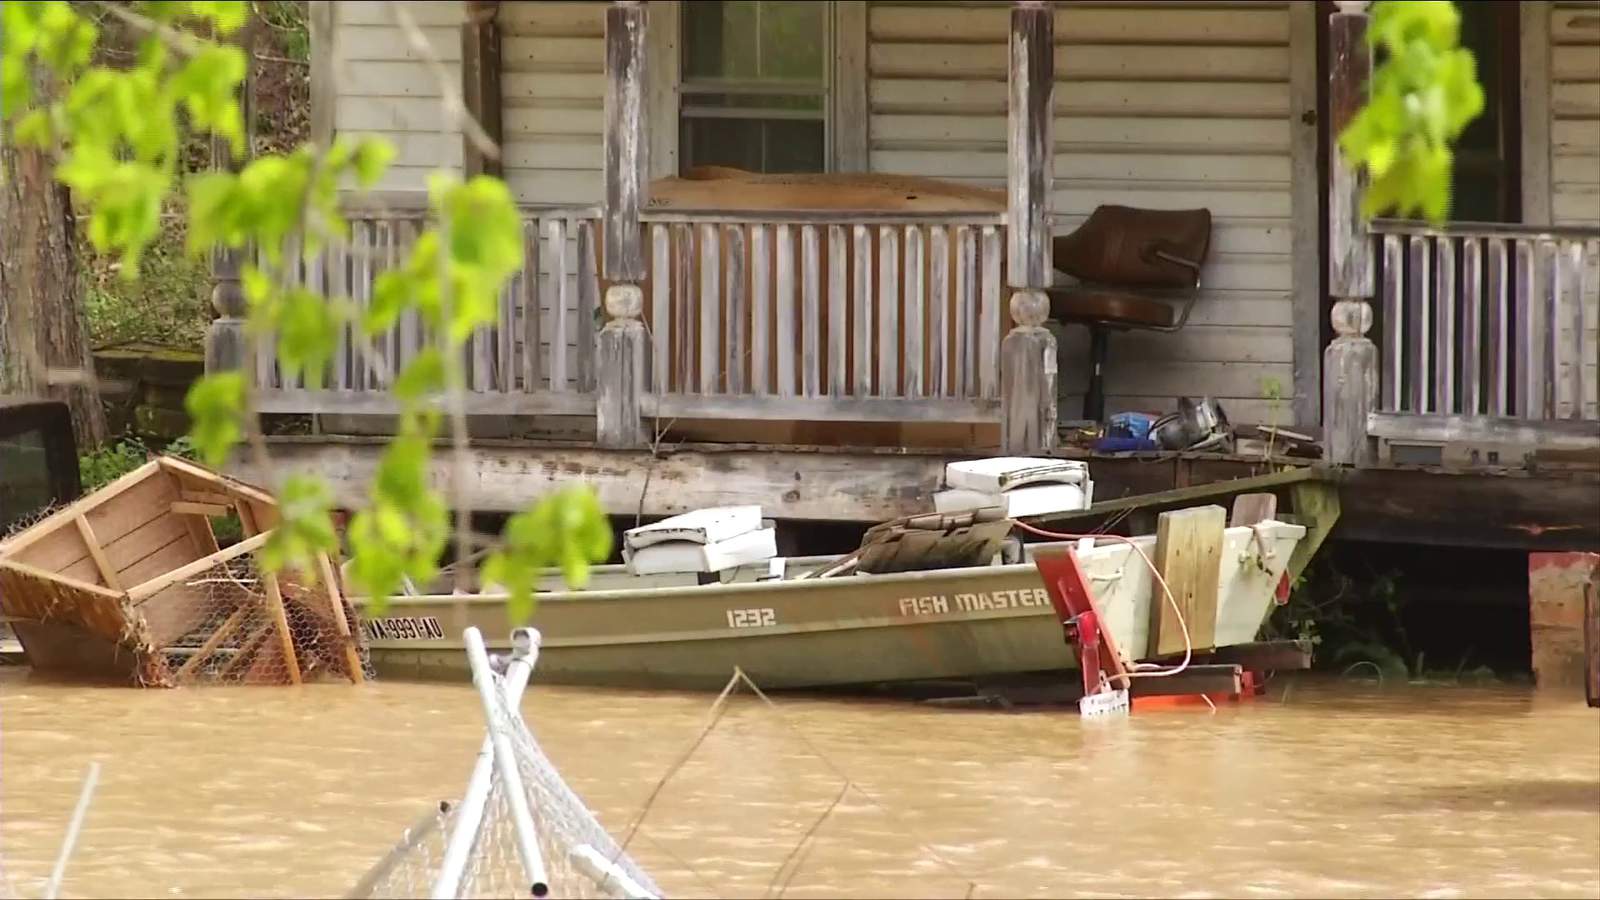 Pulaski County flooding causes three water rescues, extensive home and vehicle damage